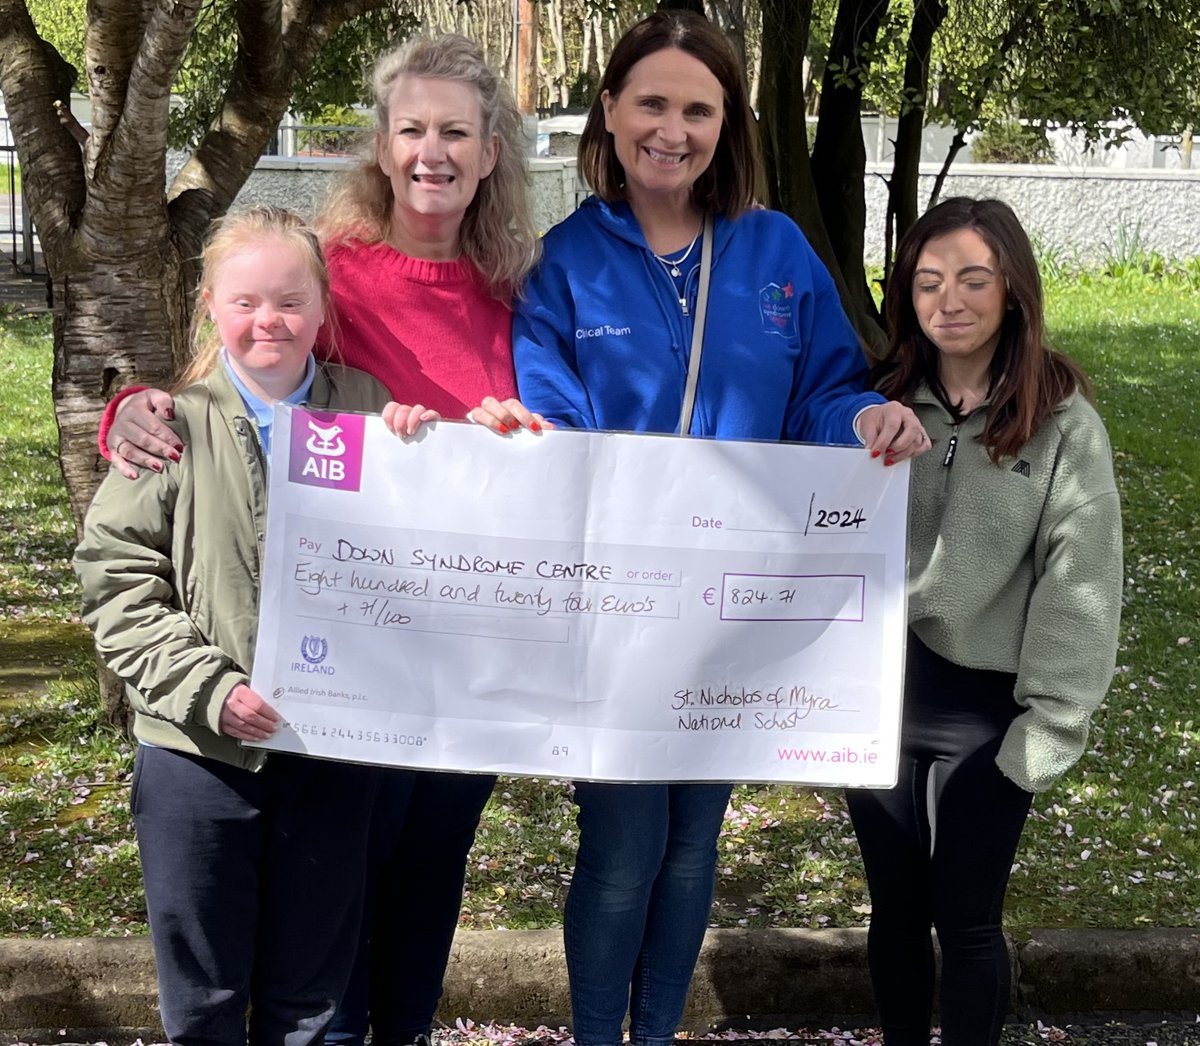 Thank you to Ella McAllister and all her friends in 6th class from Saint Nicholas of Myra National School for their odd socks fundraiser. They raised a phenomenal €824.71. We really appreciate it